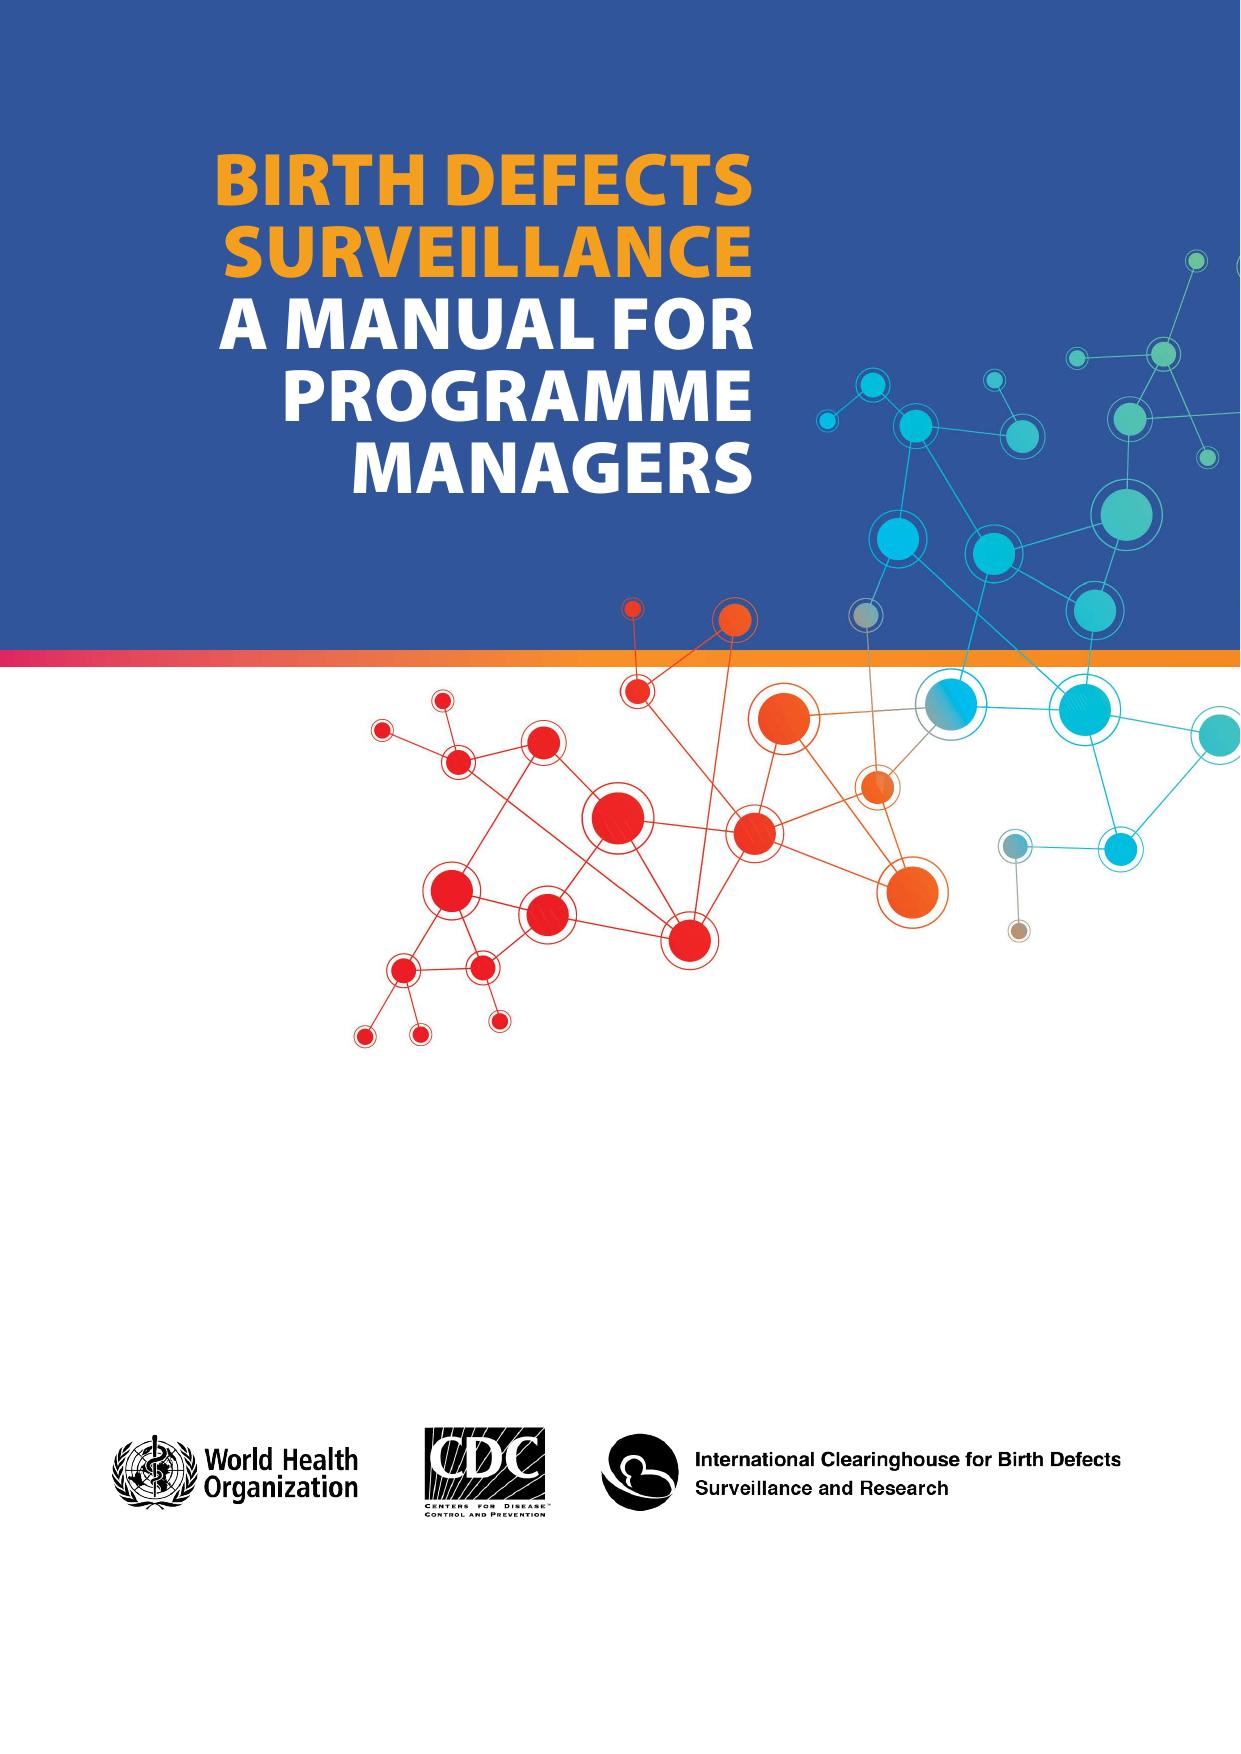 BIRTH DEFECTS SURVIELANCE a manual for programme managers 2014